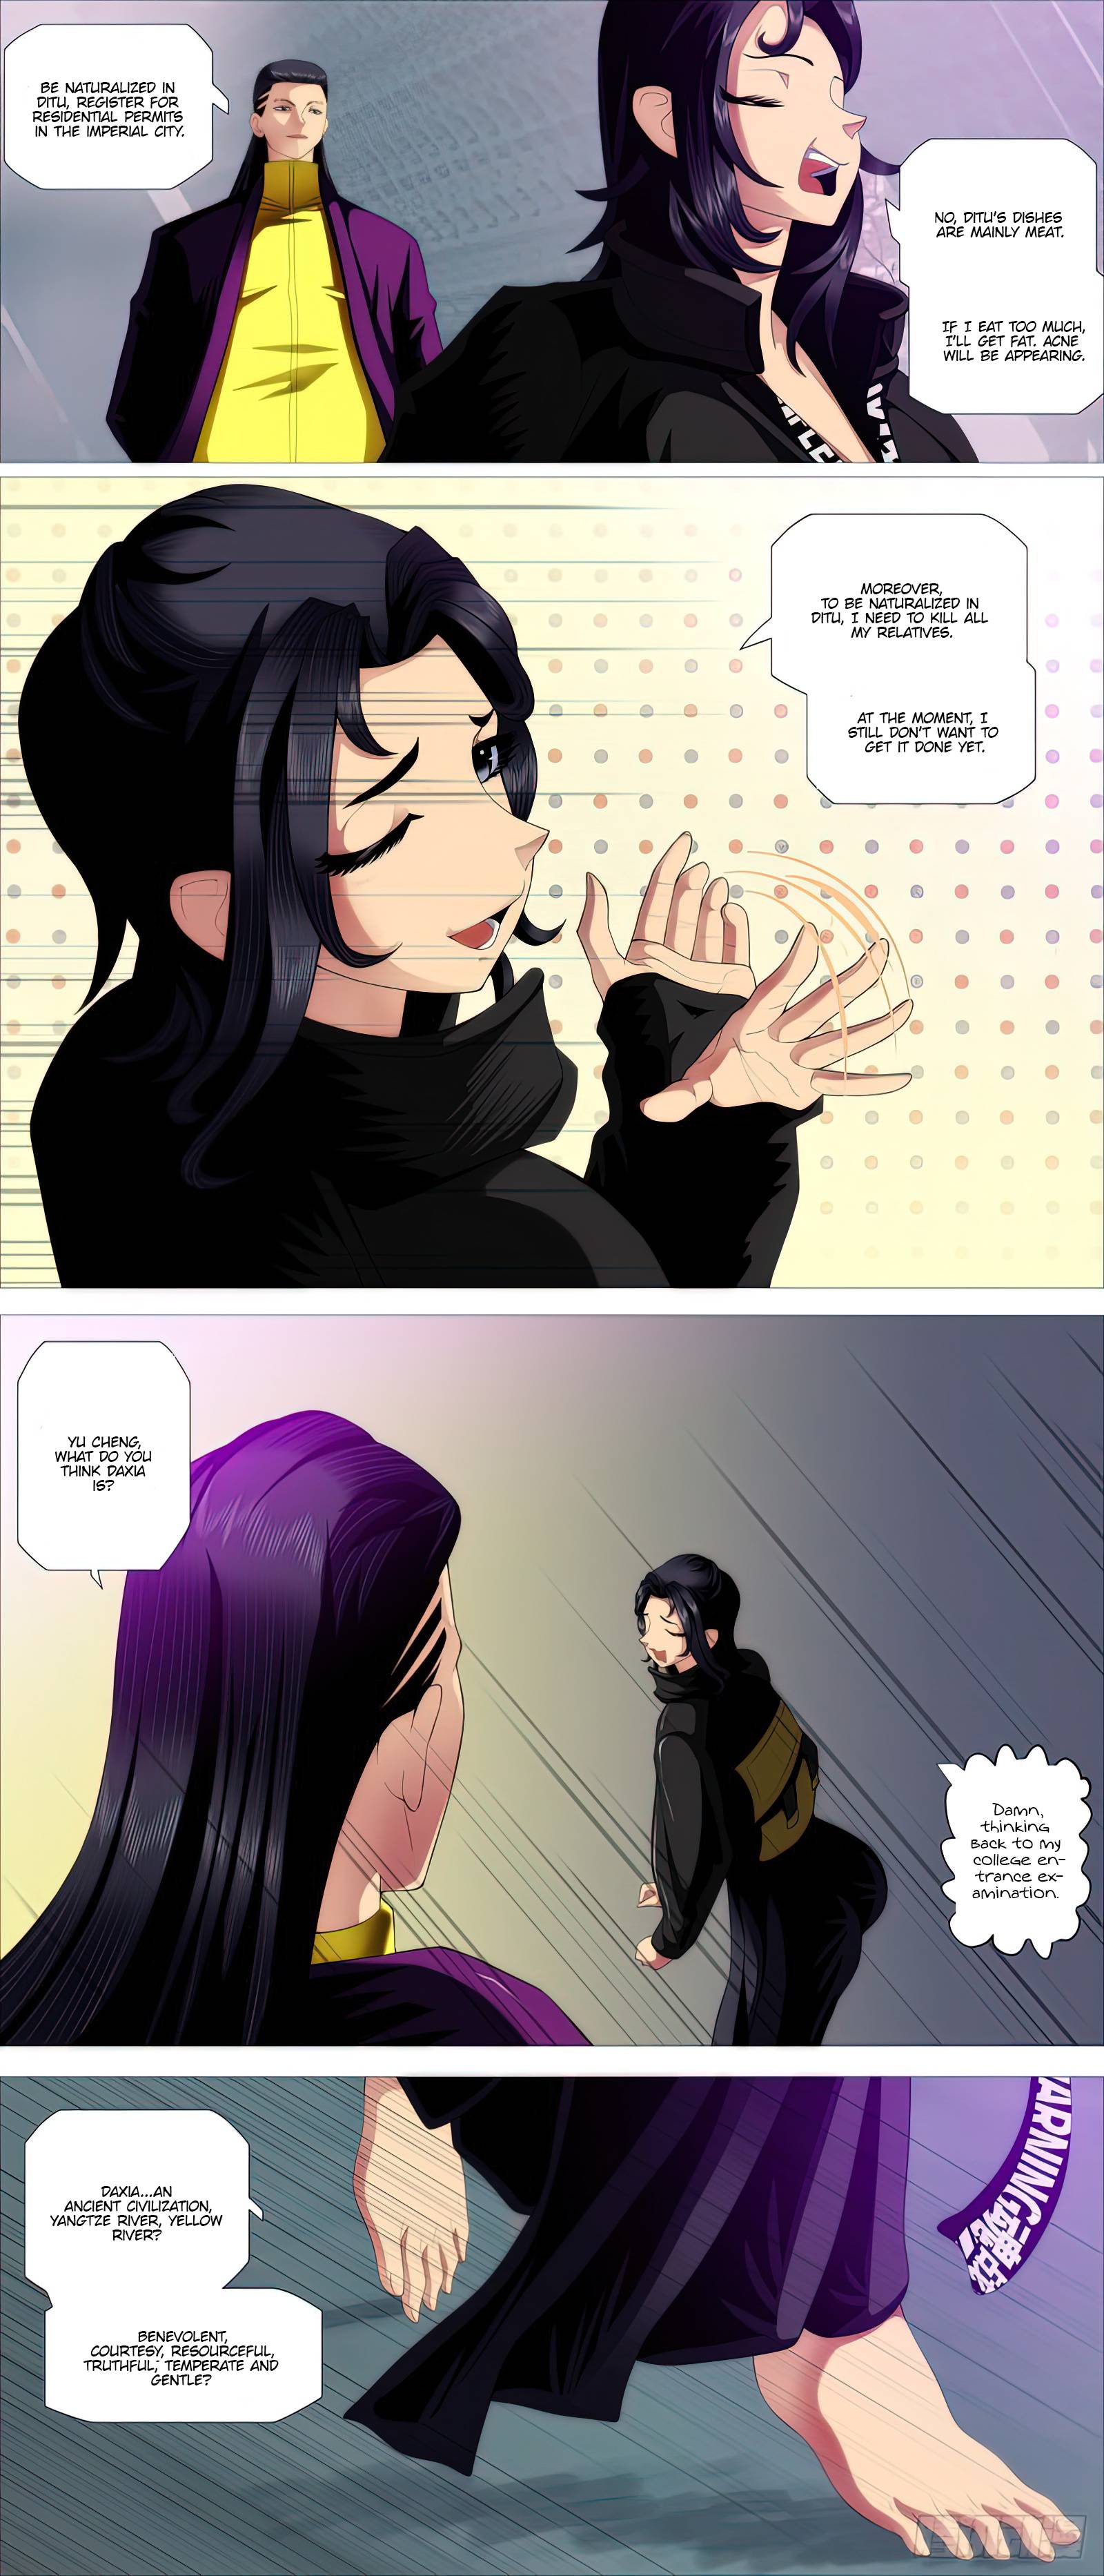 Iron Ladies chapter 488 page 11